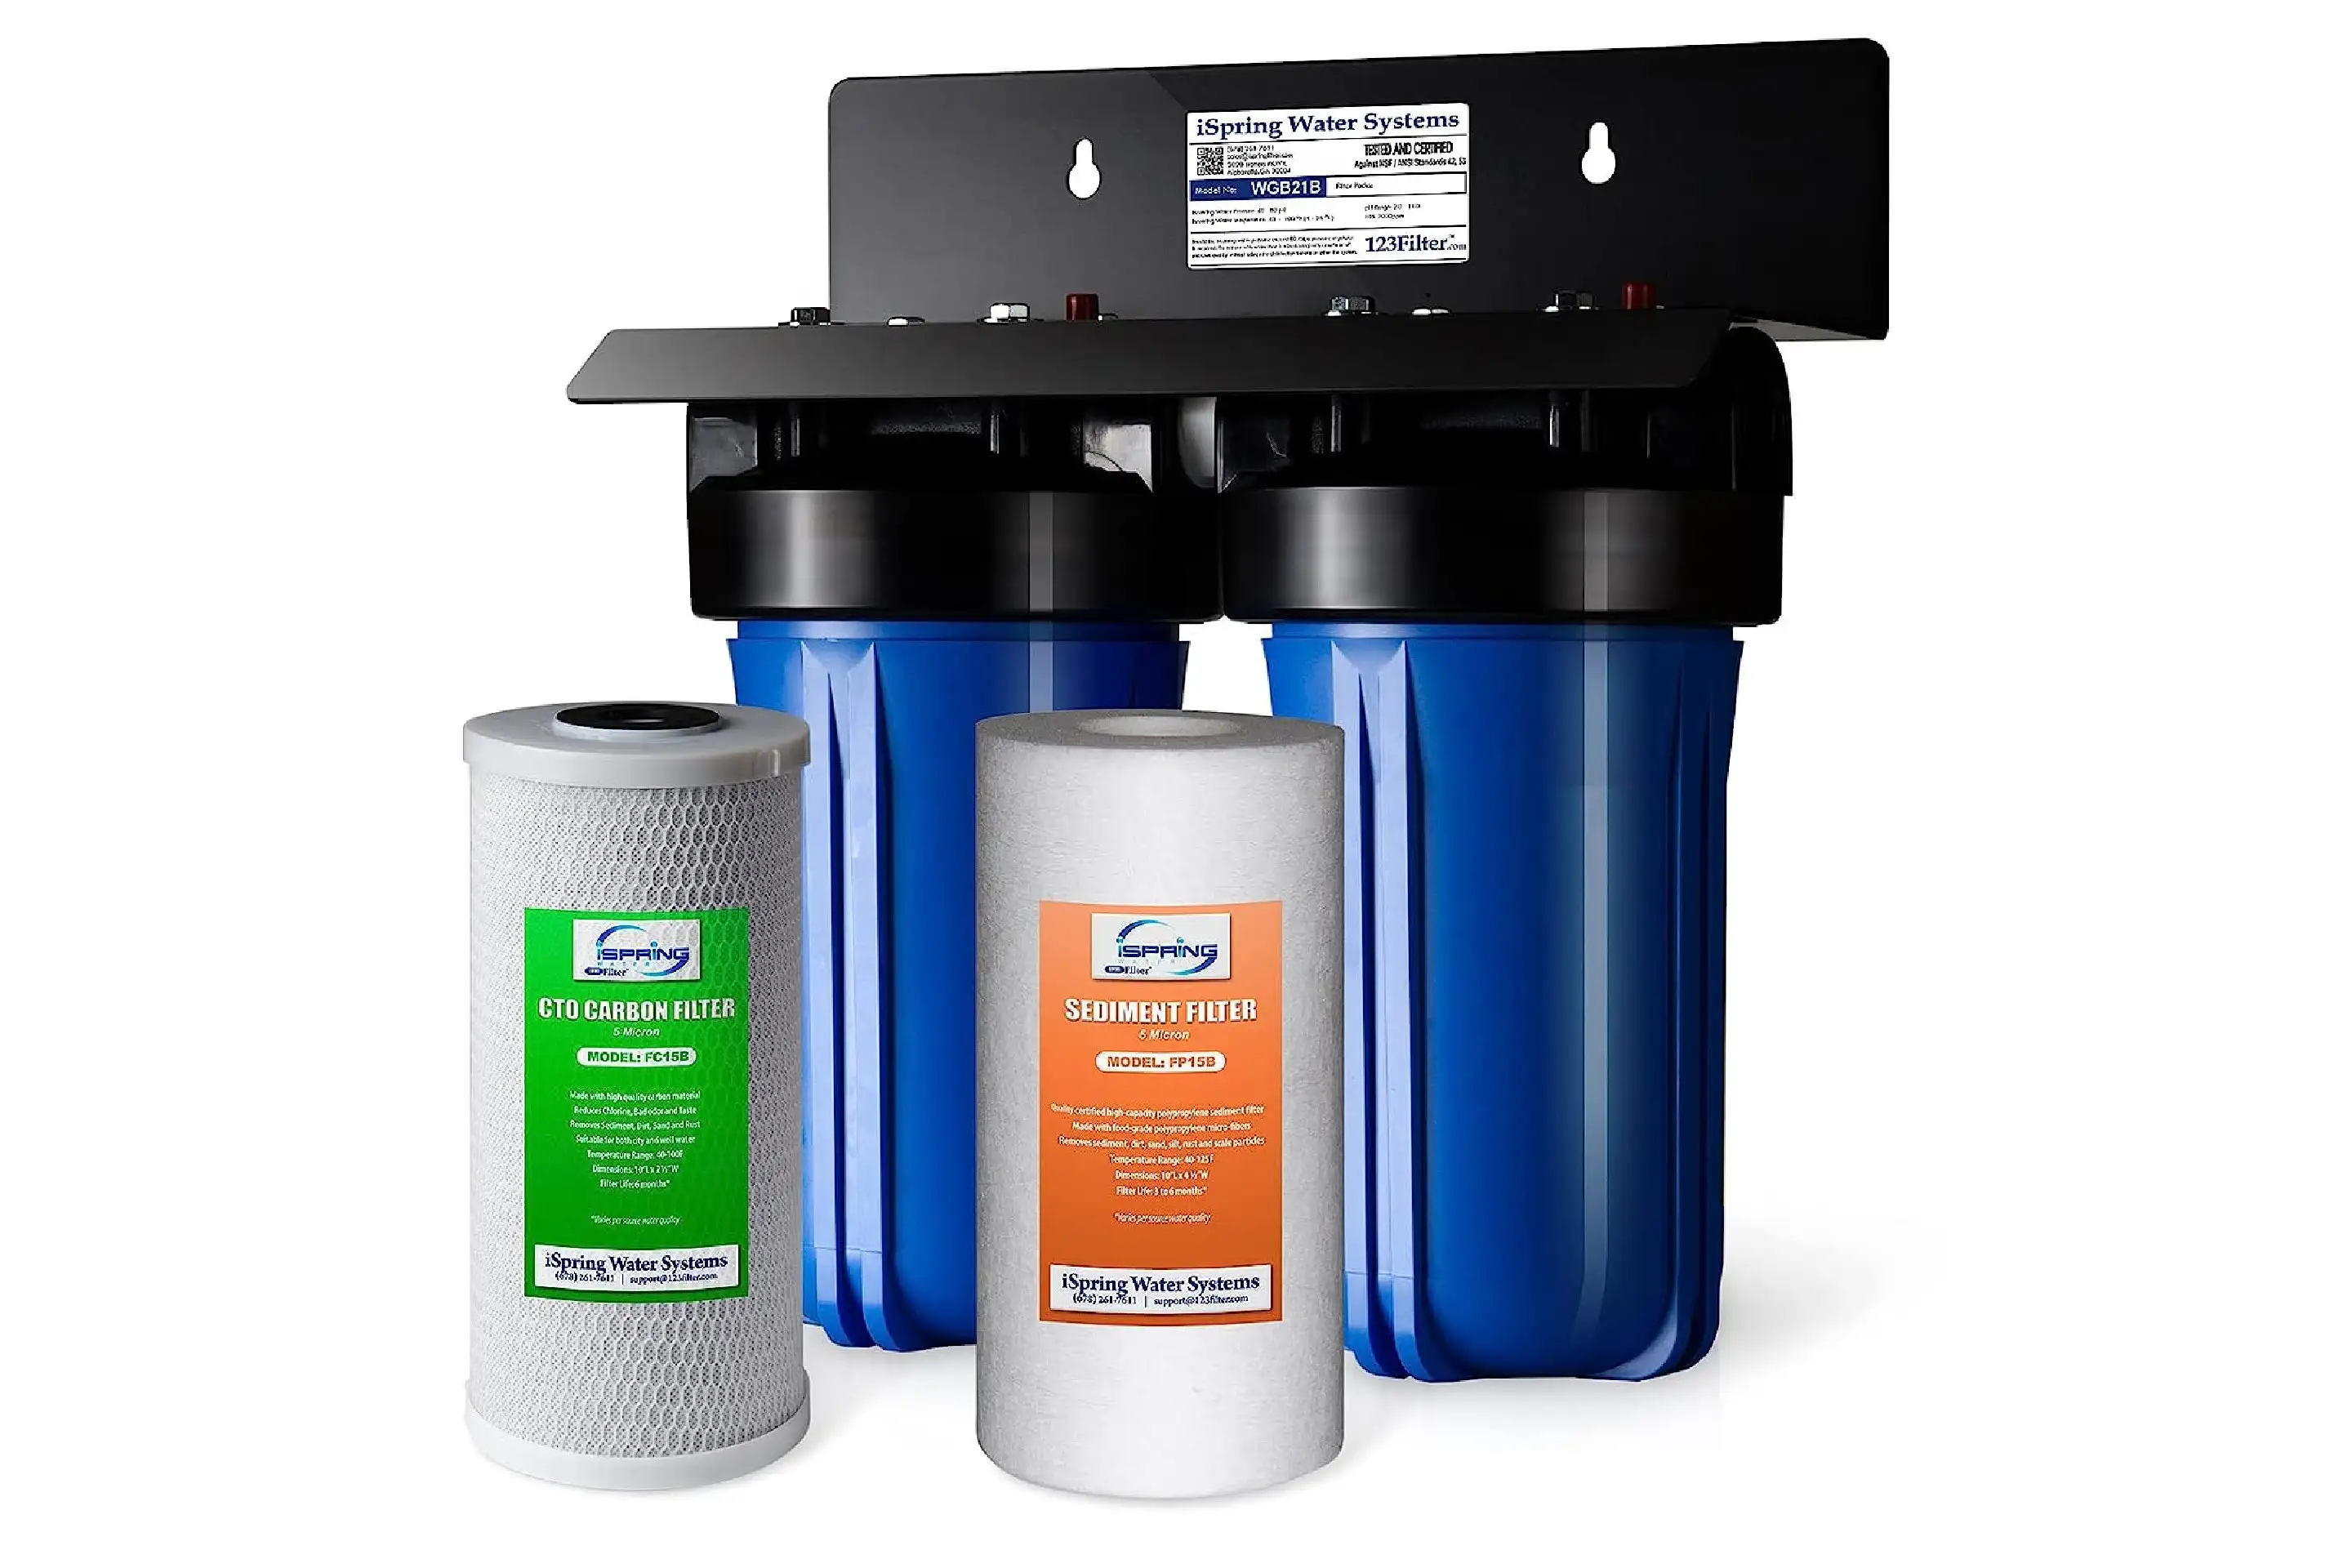 iSpring Whole House Water Filtration System